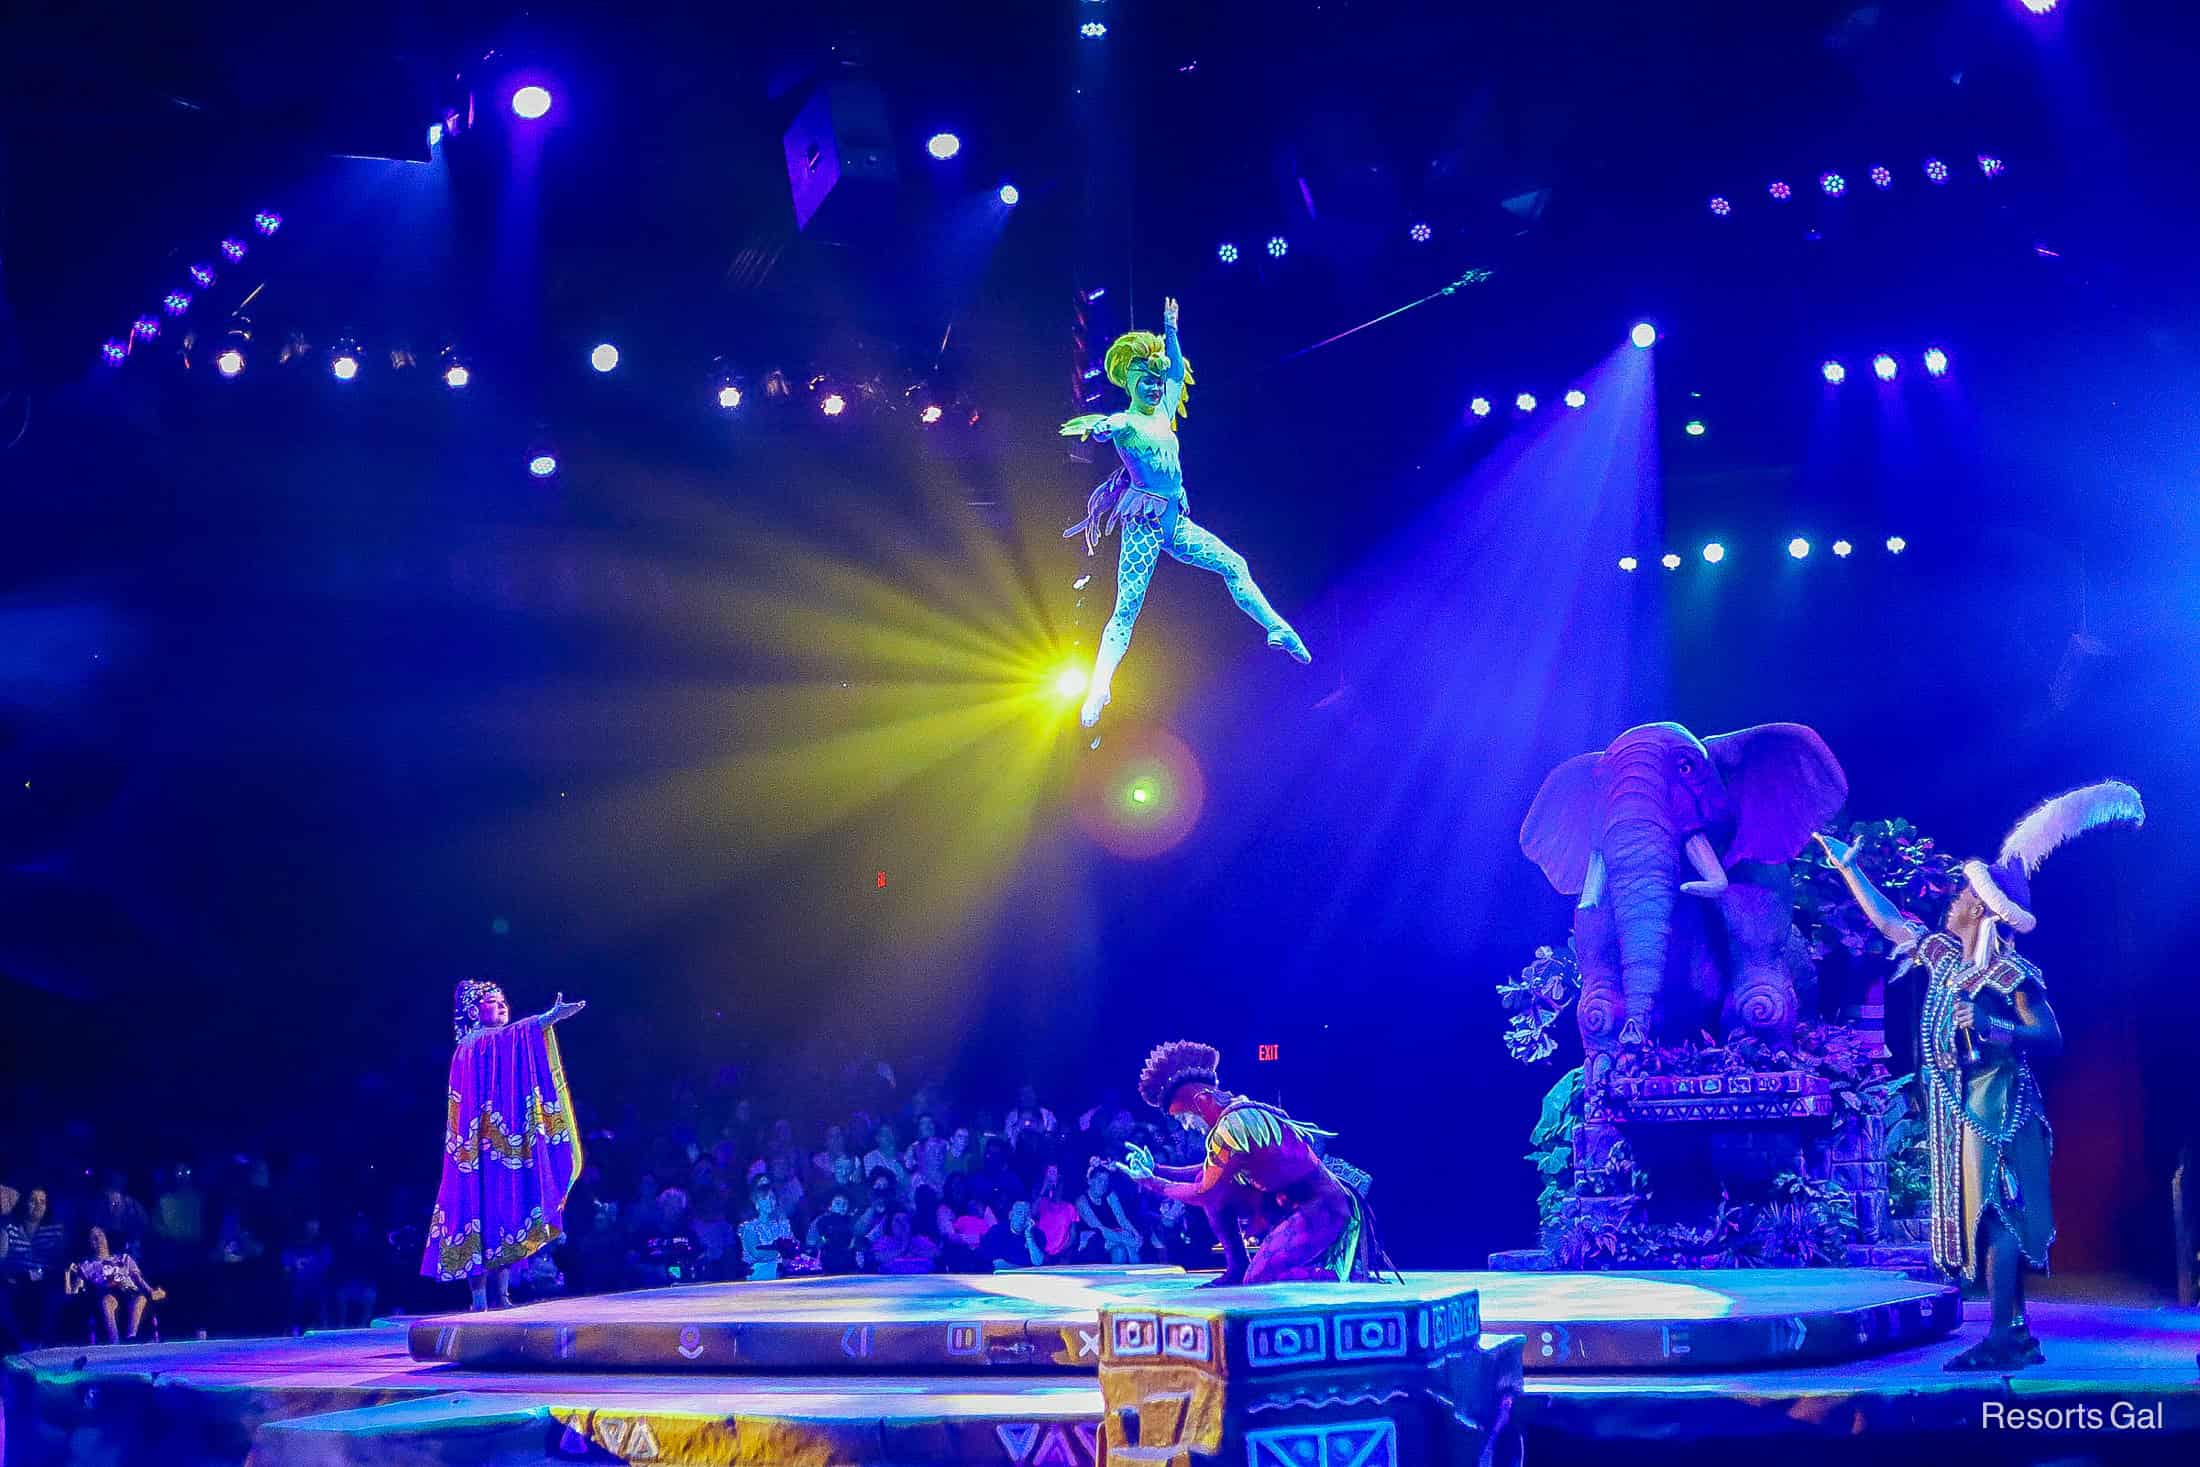 the aerial performer hangs from the ceiling high above everyone 